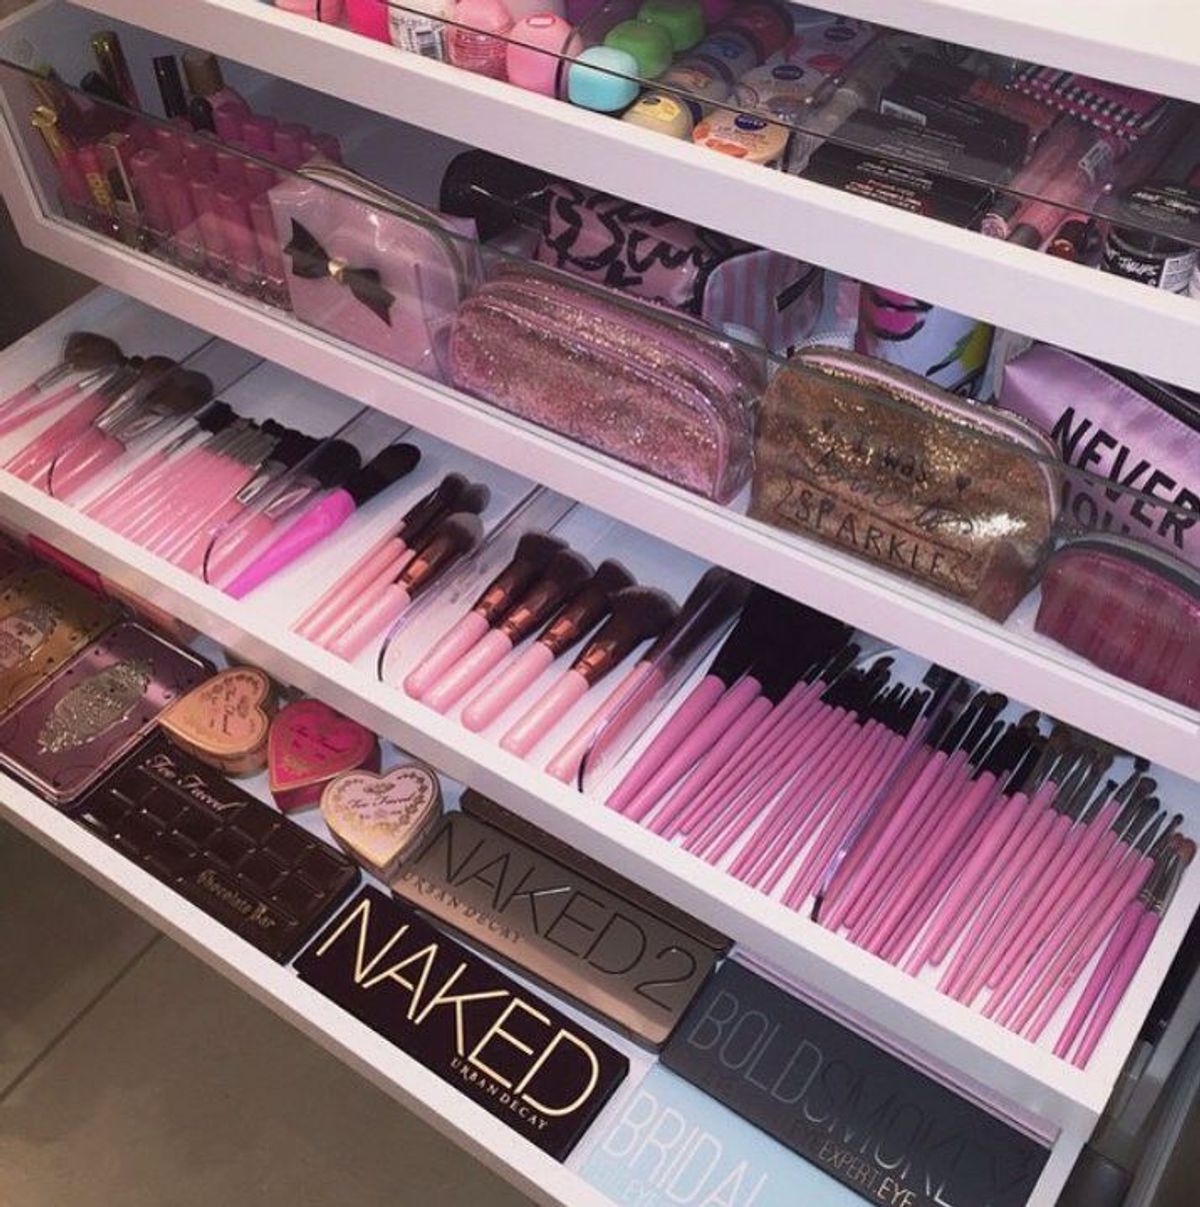 So You Want To Start A Makeup Collection...